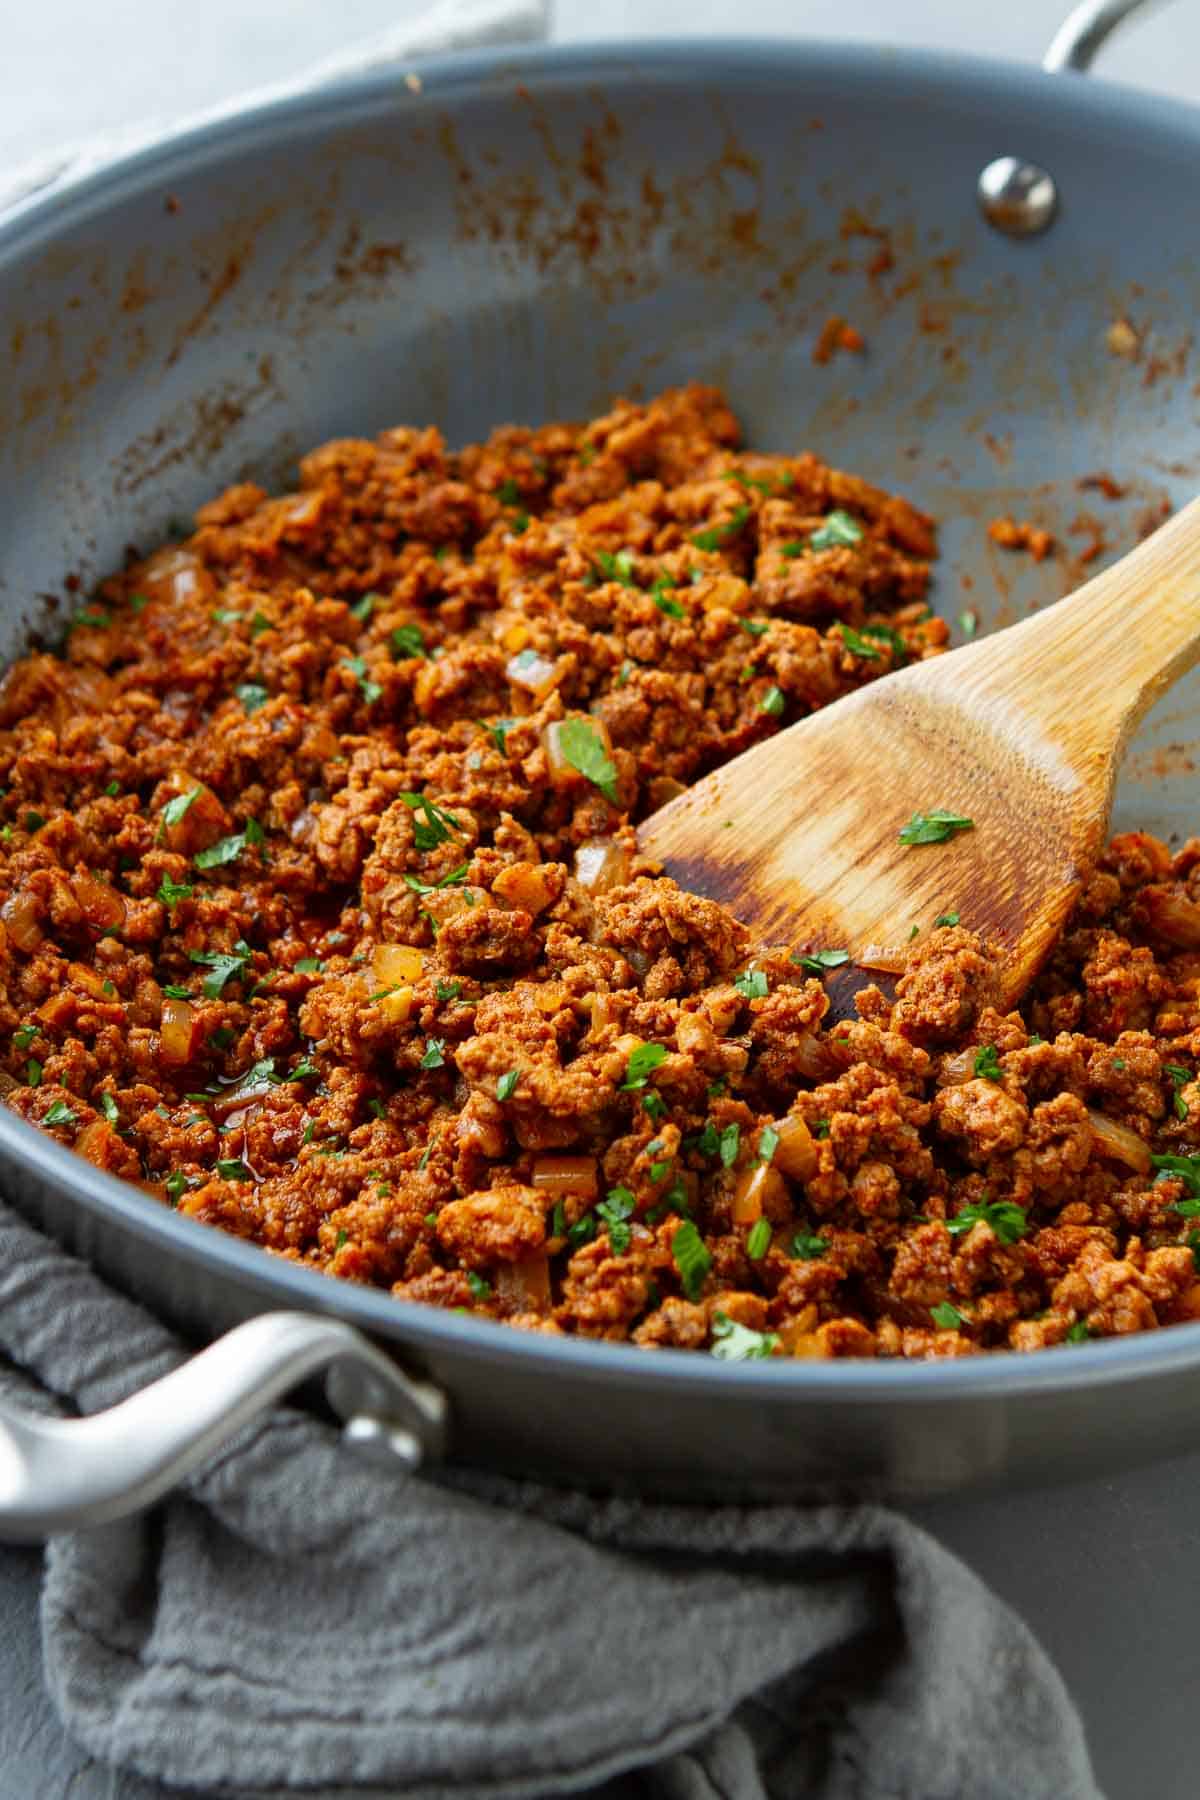 Taco seasoned ground meat in a blue skillet.